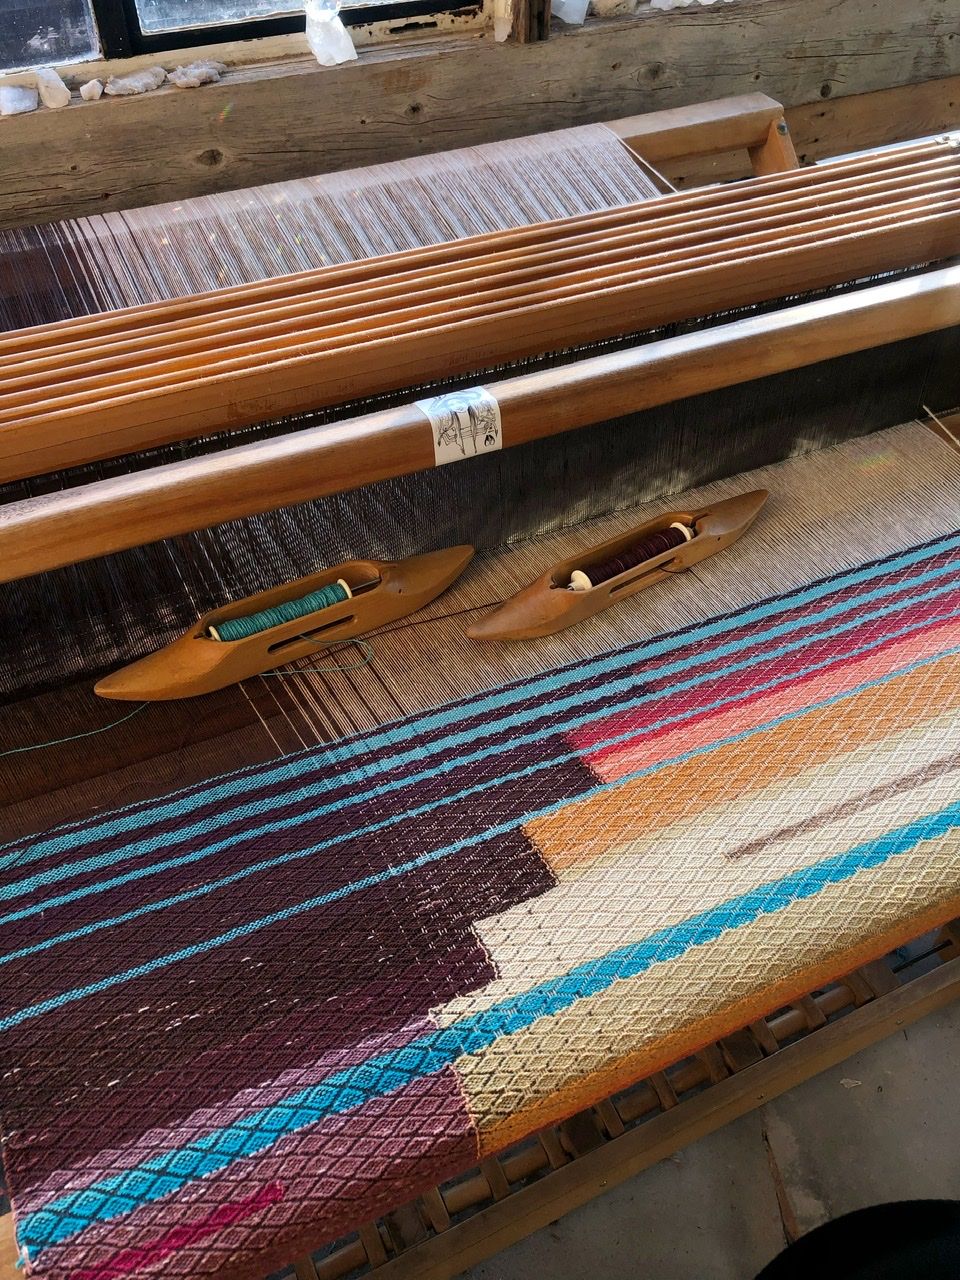 A view from above of a loom with a large graphic shaped, multi colored weaving on it in purples, yellows, blue, pink and red